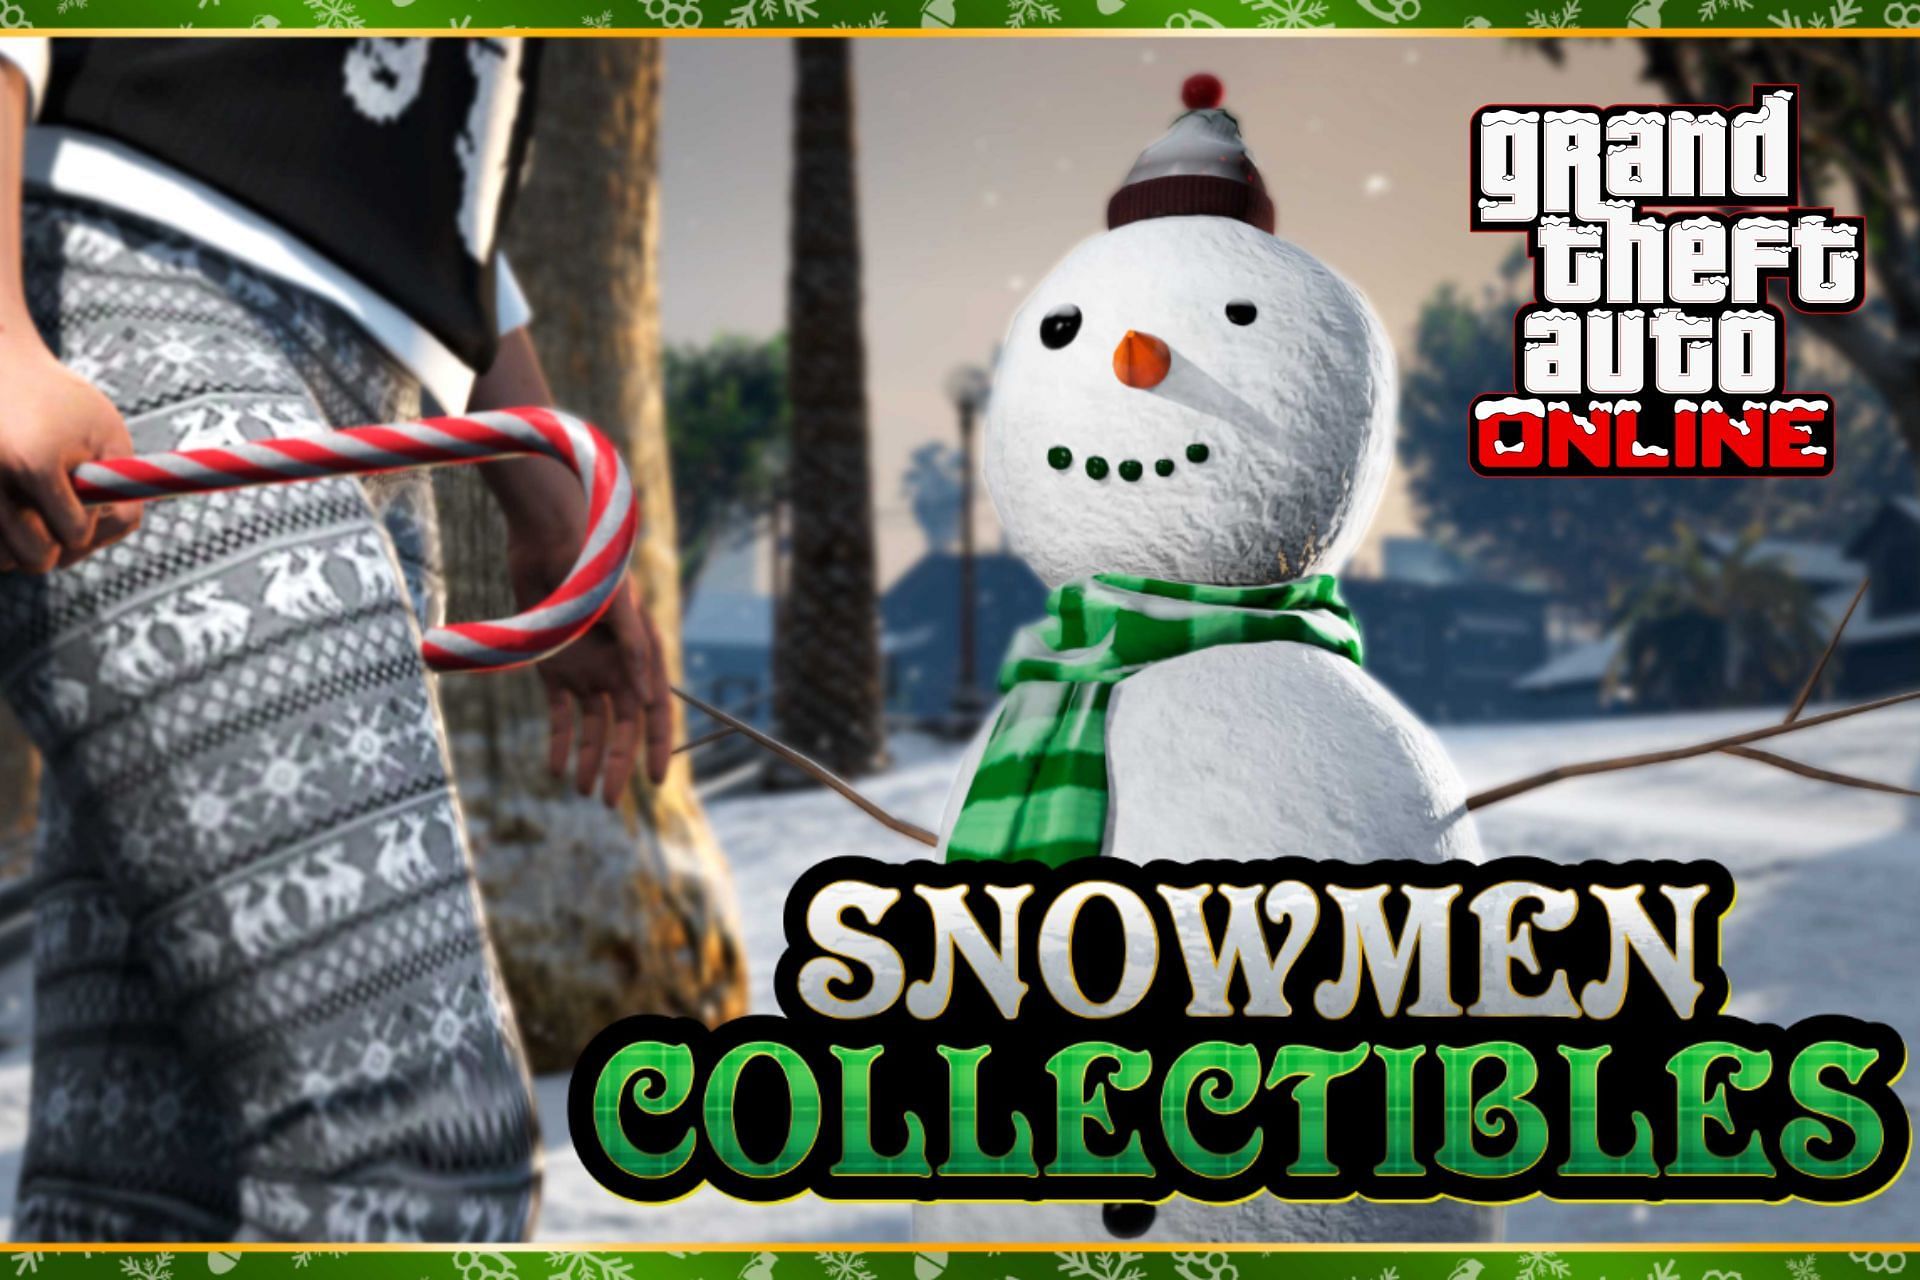 All 25 locations to find Snowmen collectibles in GTA Online Festive